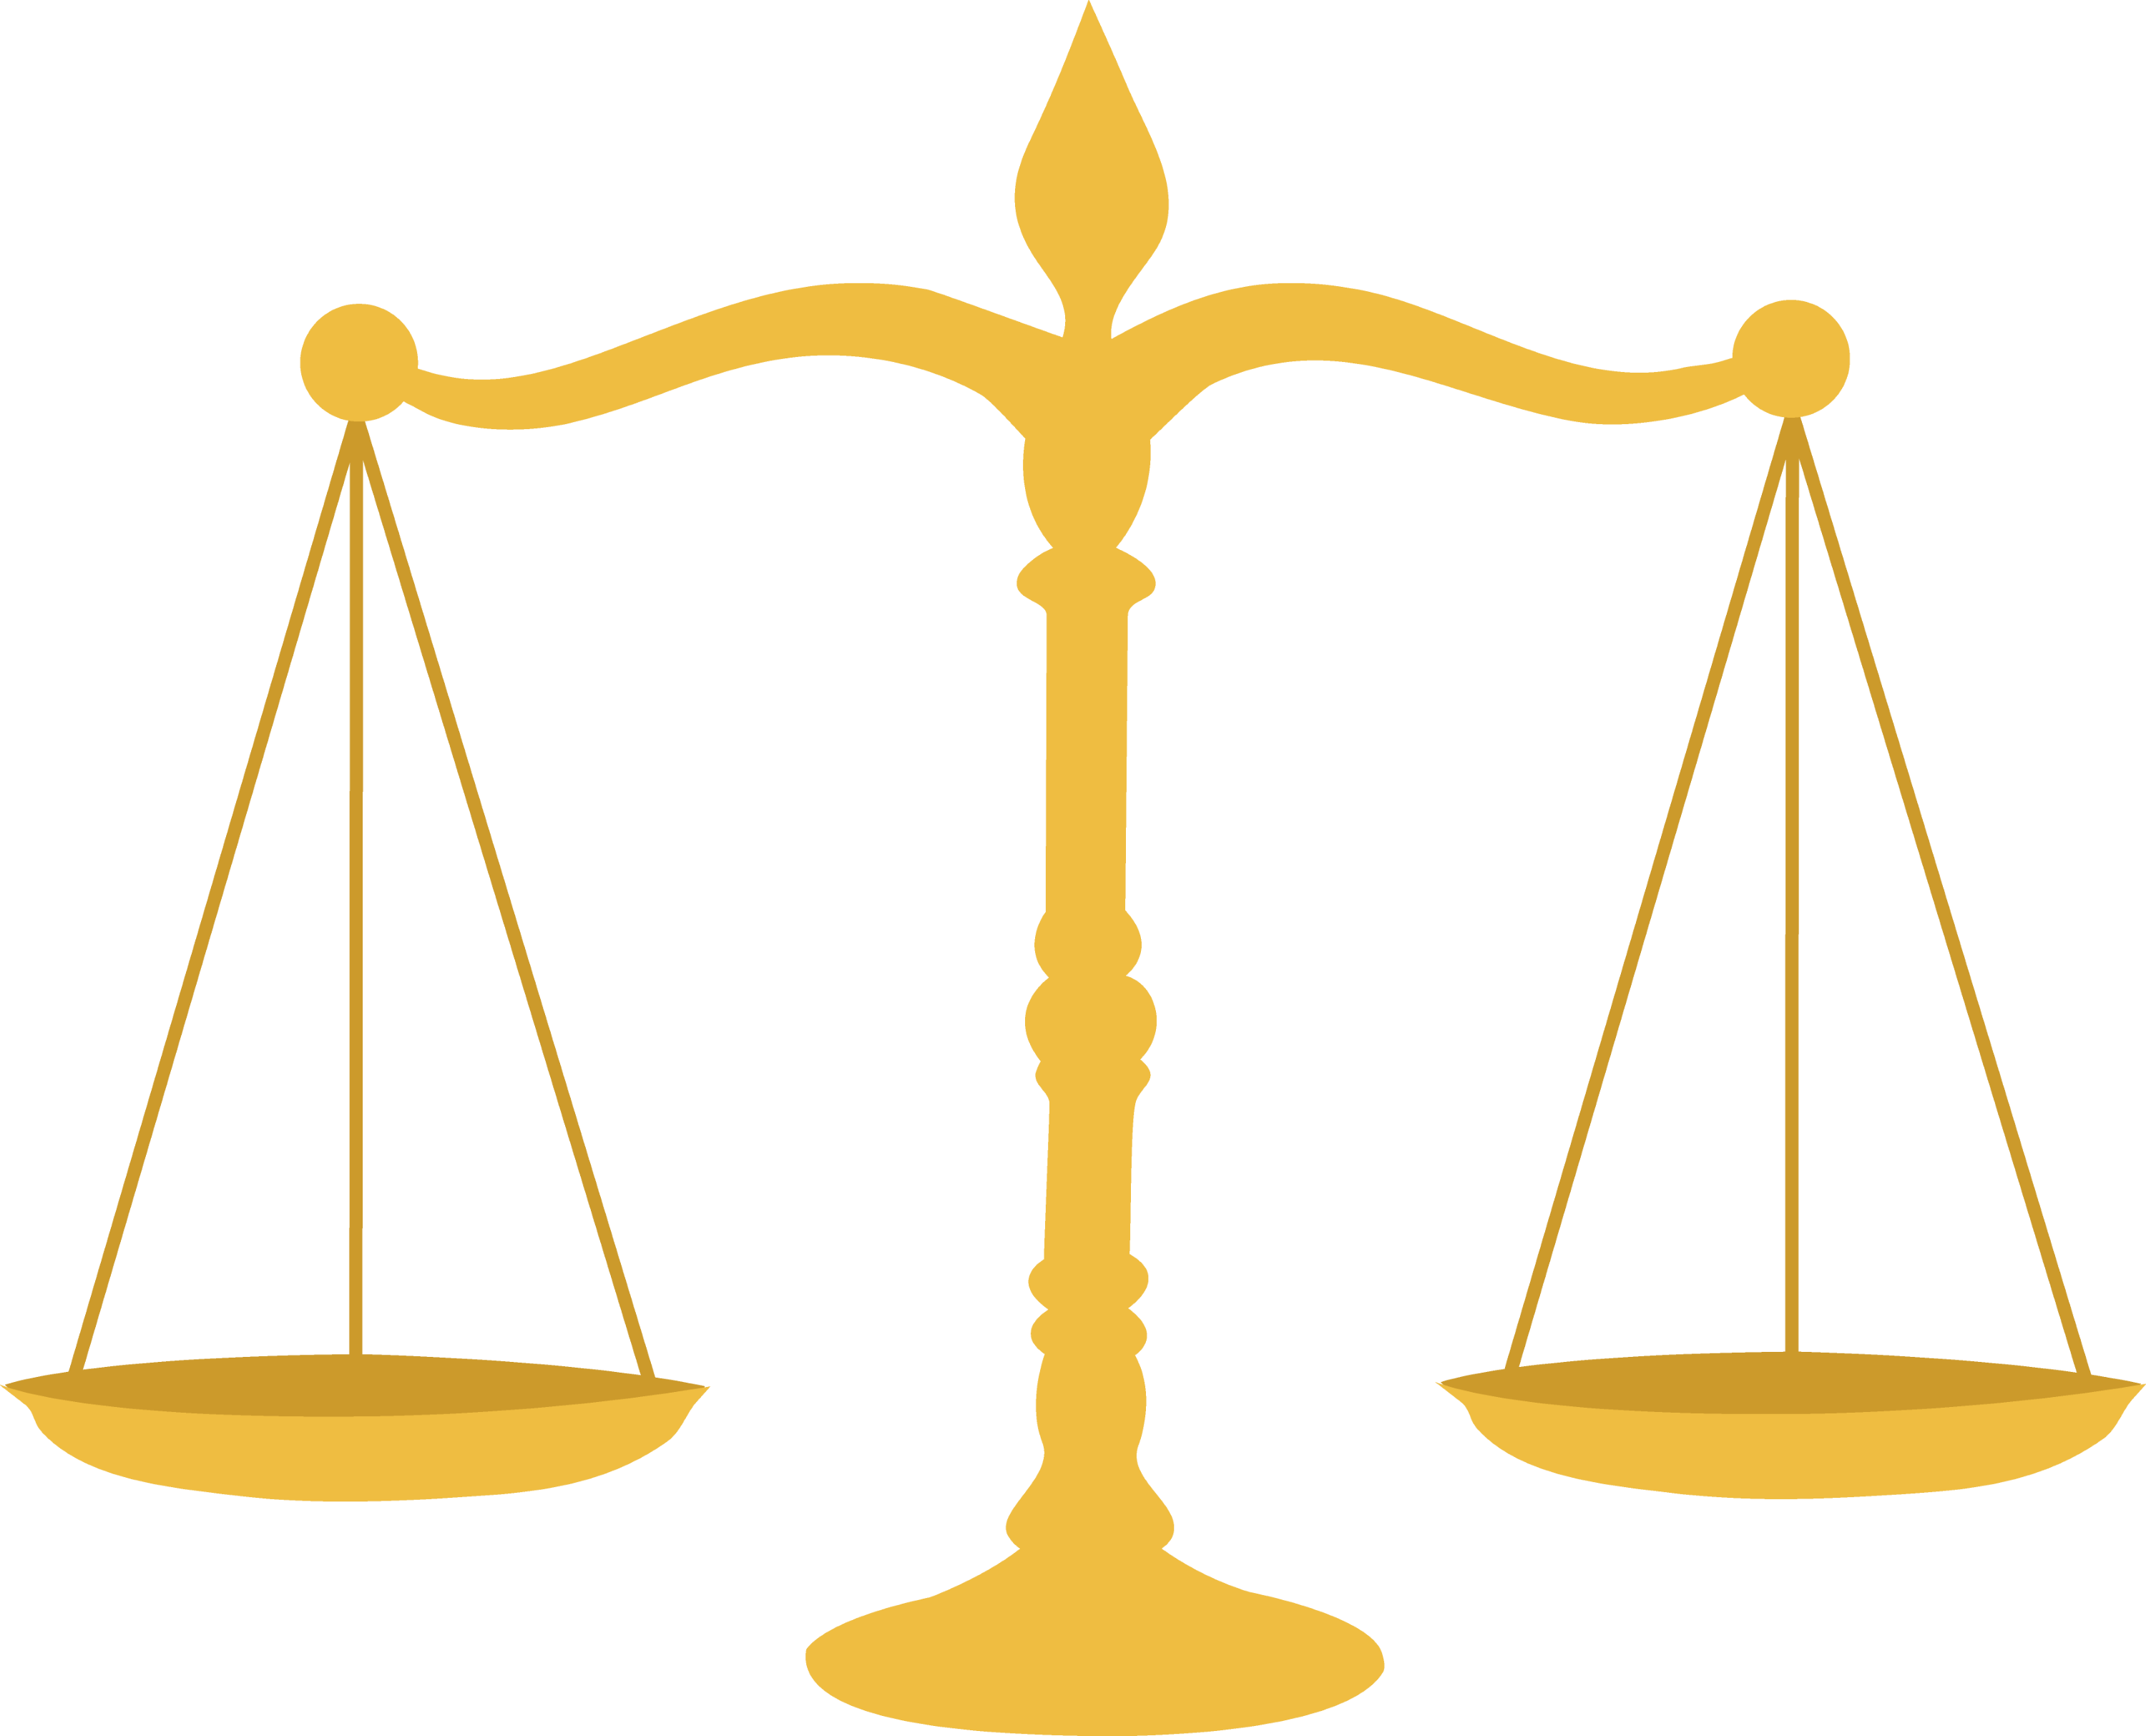 scales of justice clip art free download - photo #39